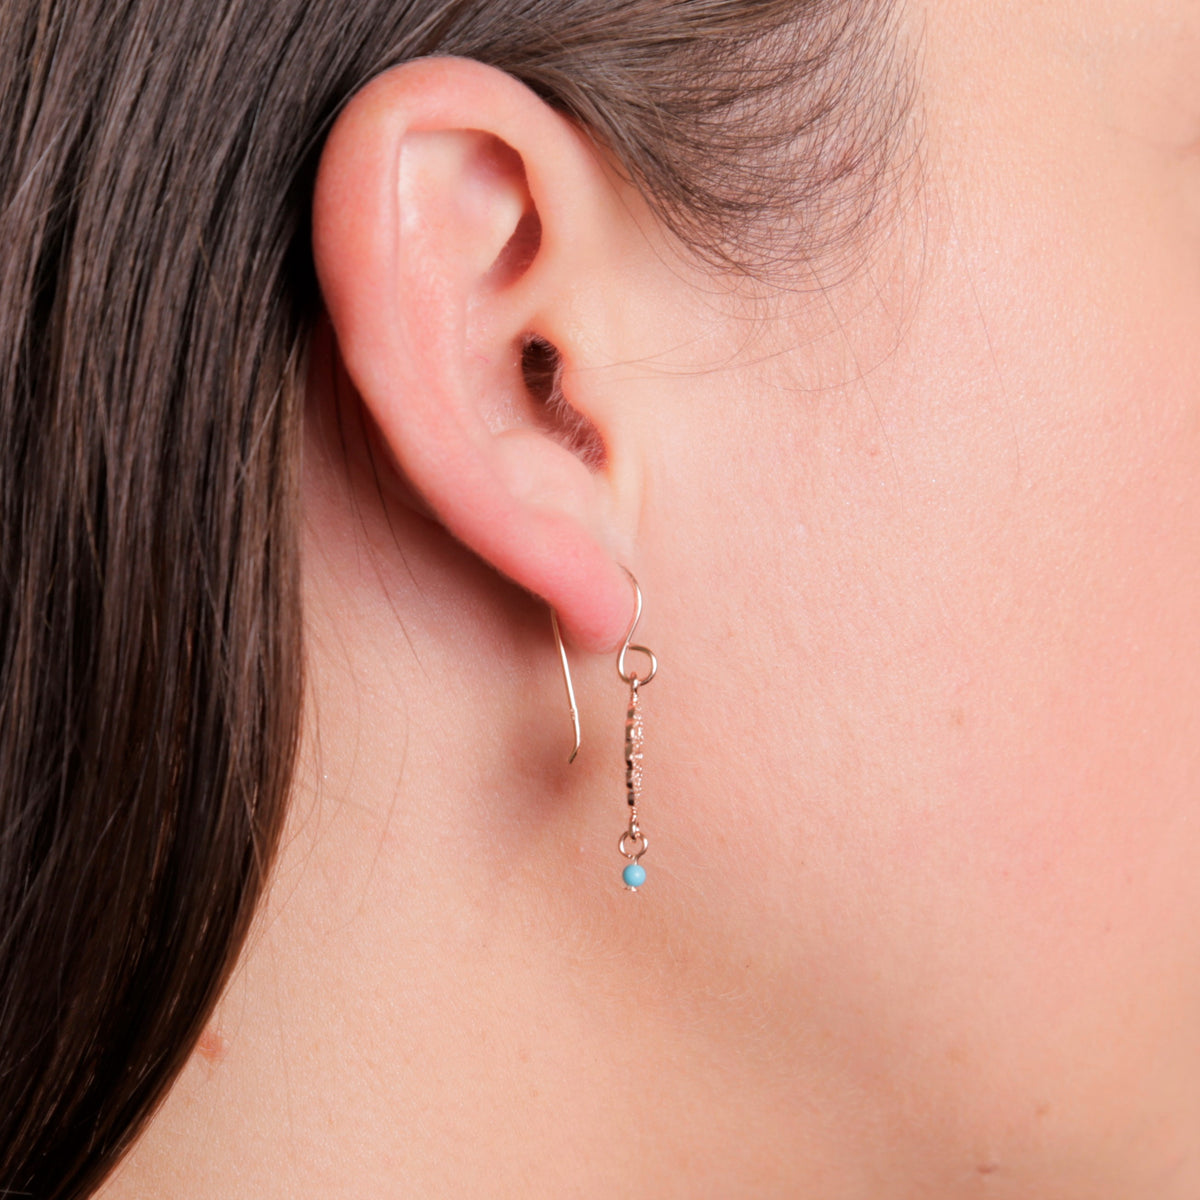 Rose Gold Plated Filigree Disc Drop Earrings With Blue Bead